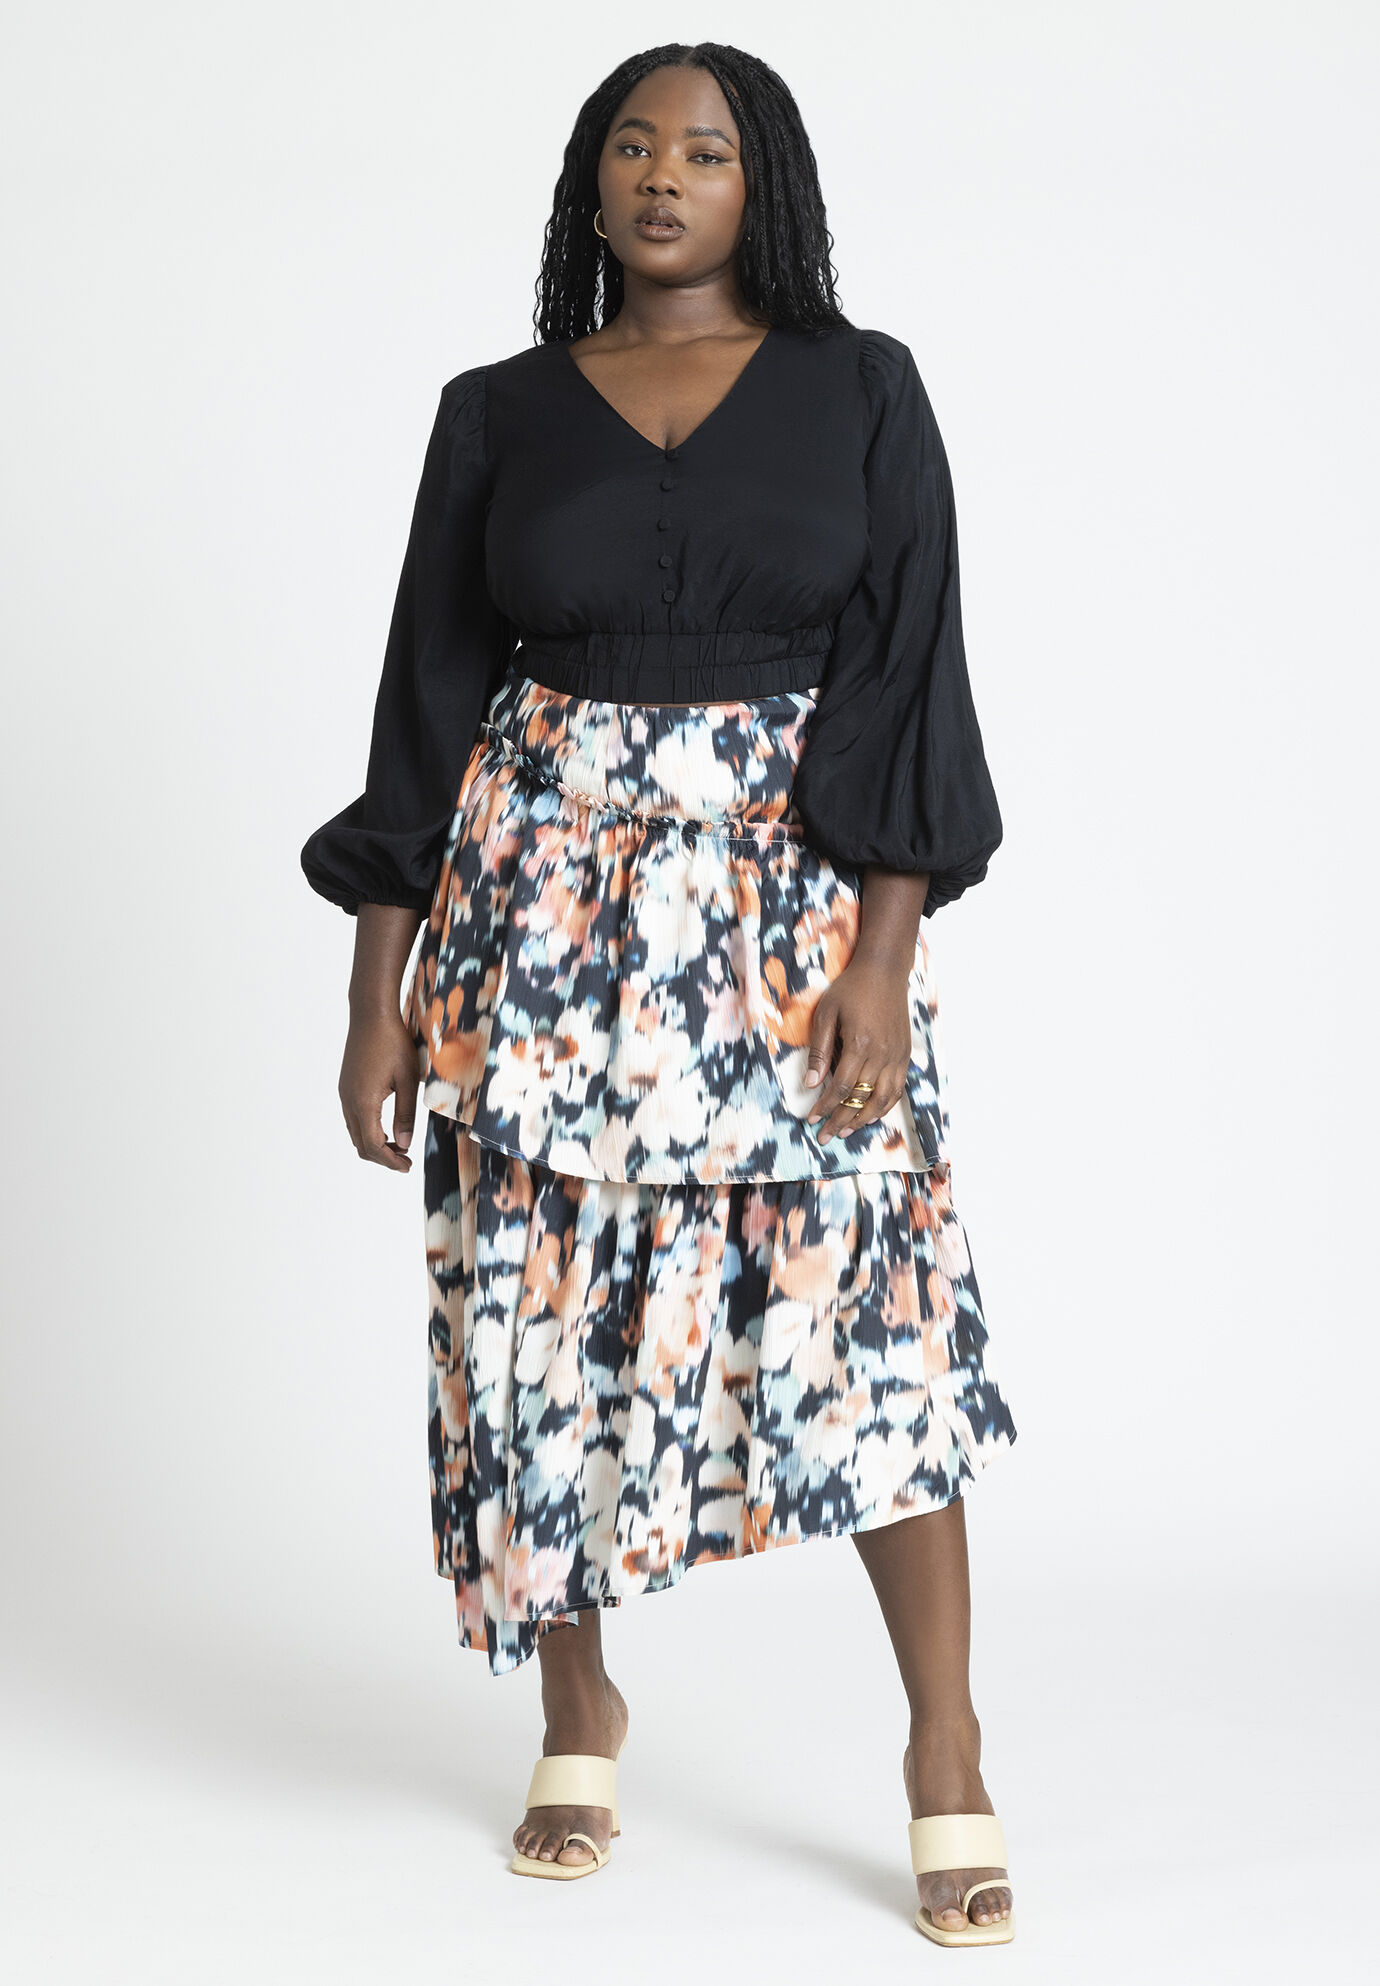 Plus Size Women Asym Tiered Printed Skirt By (size 20)